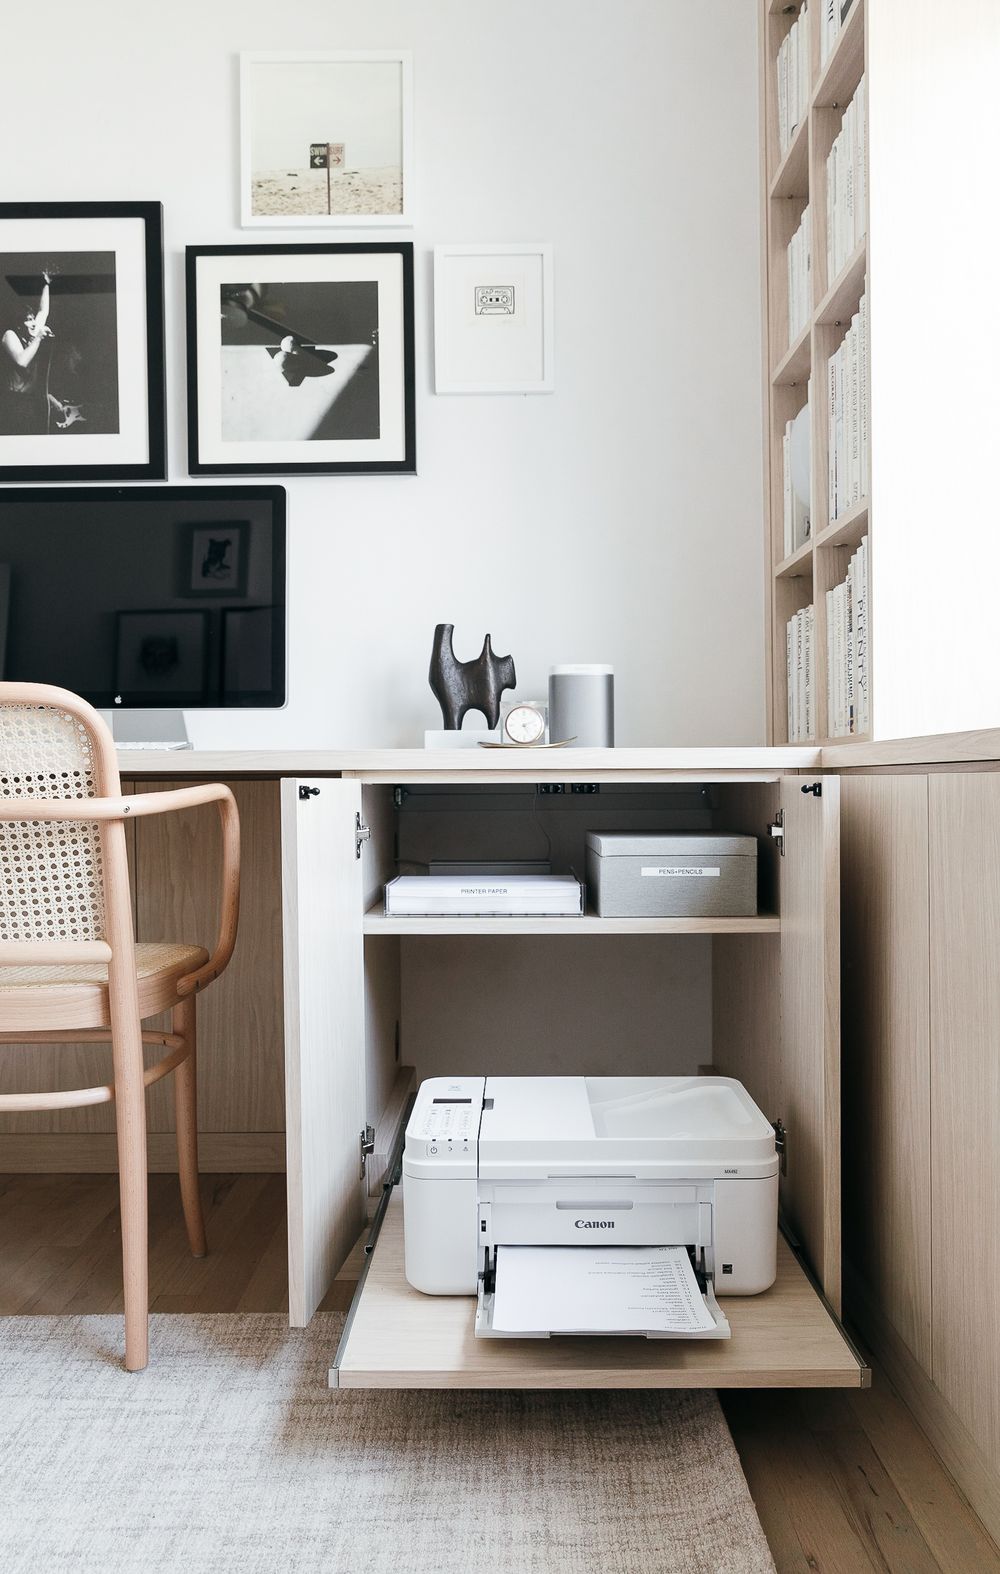 Printer Pull-Out drawer in home office design by AnneSage